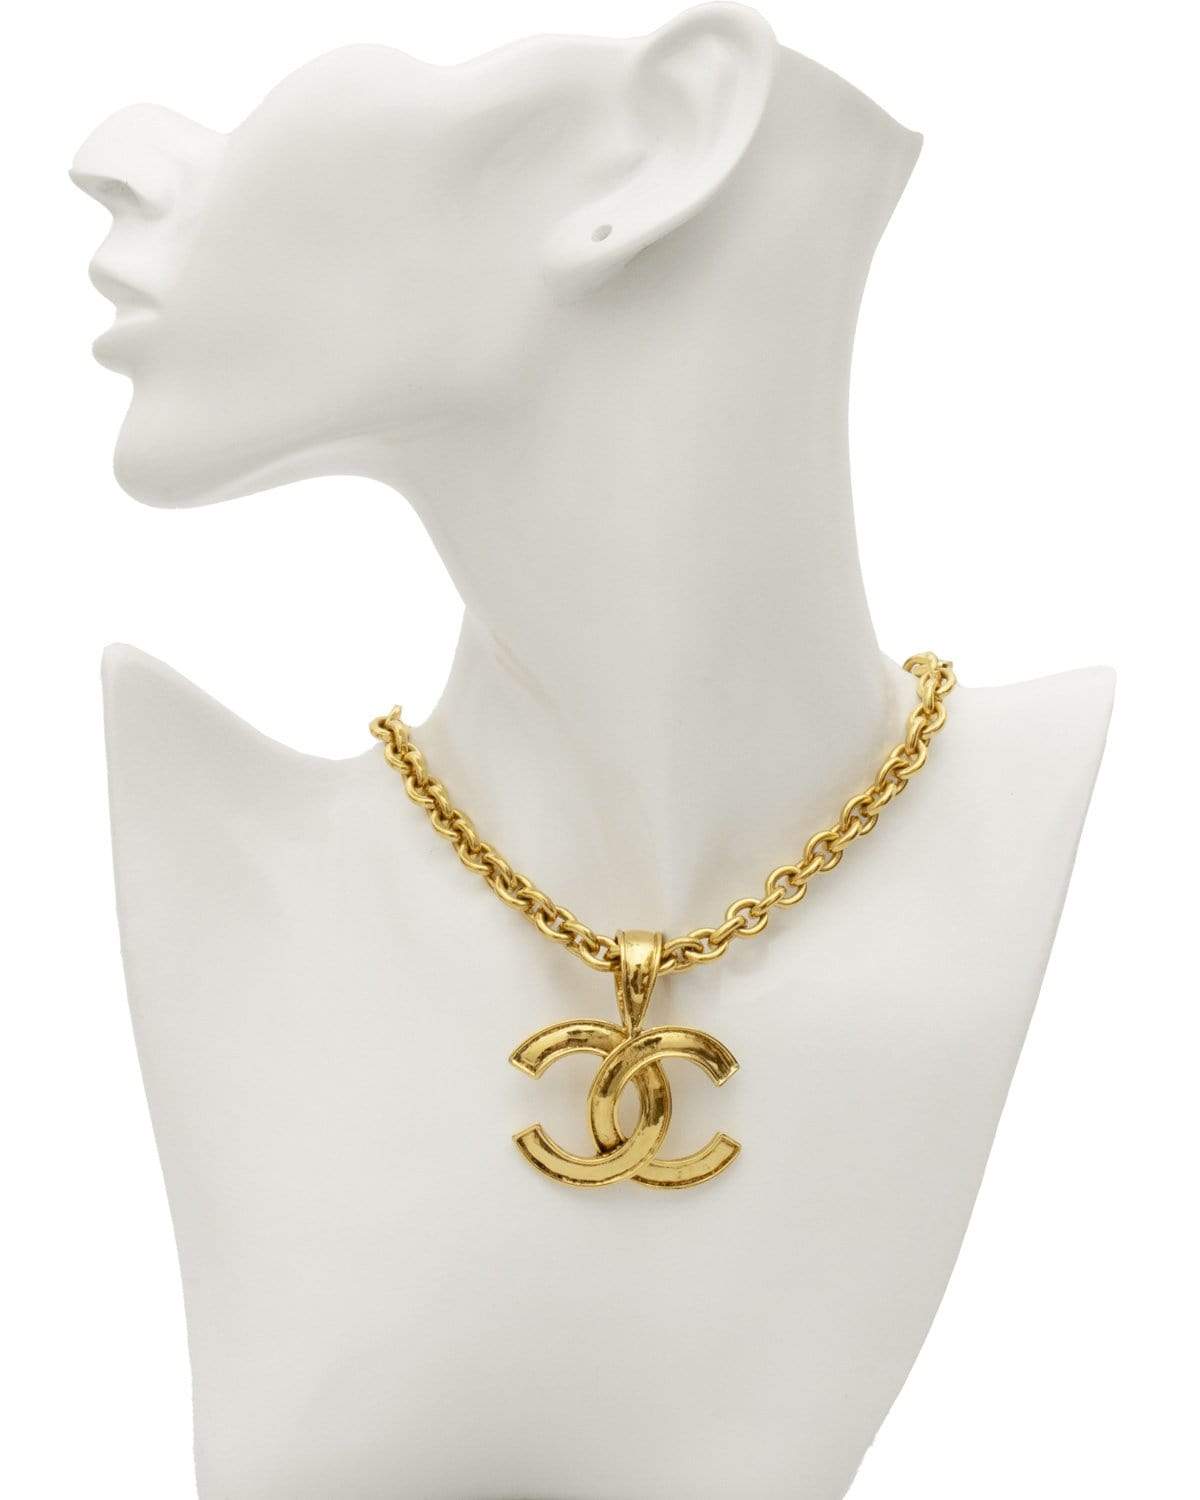 MINT. Vintage CHANEL golden chain necklace with large CC mark logo pendant  top. Gorgeous jewelry. Best gift idea. 0409291